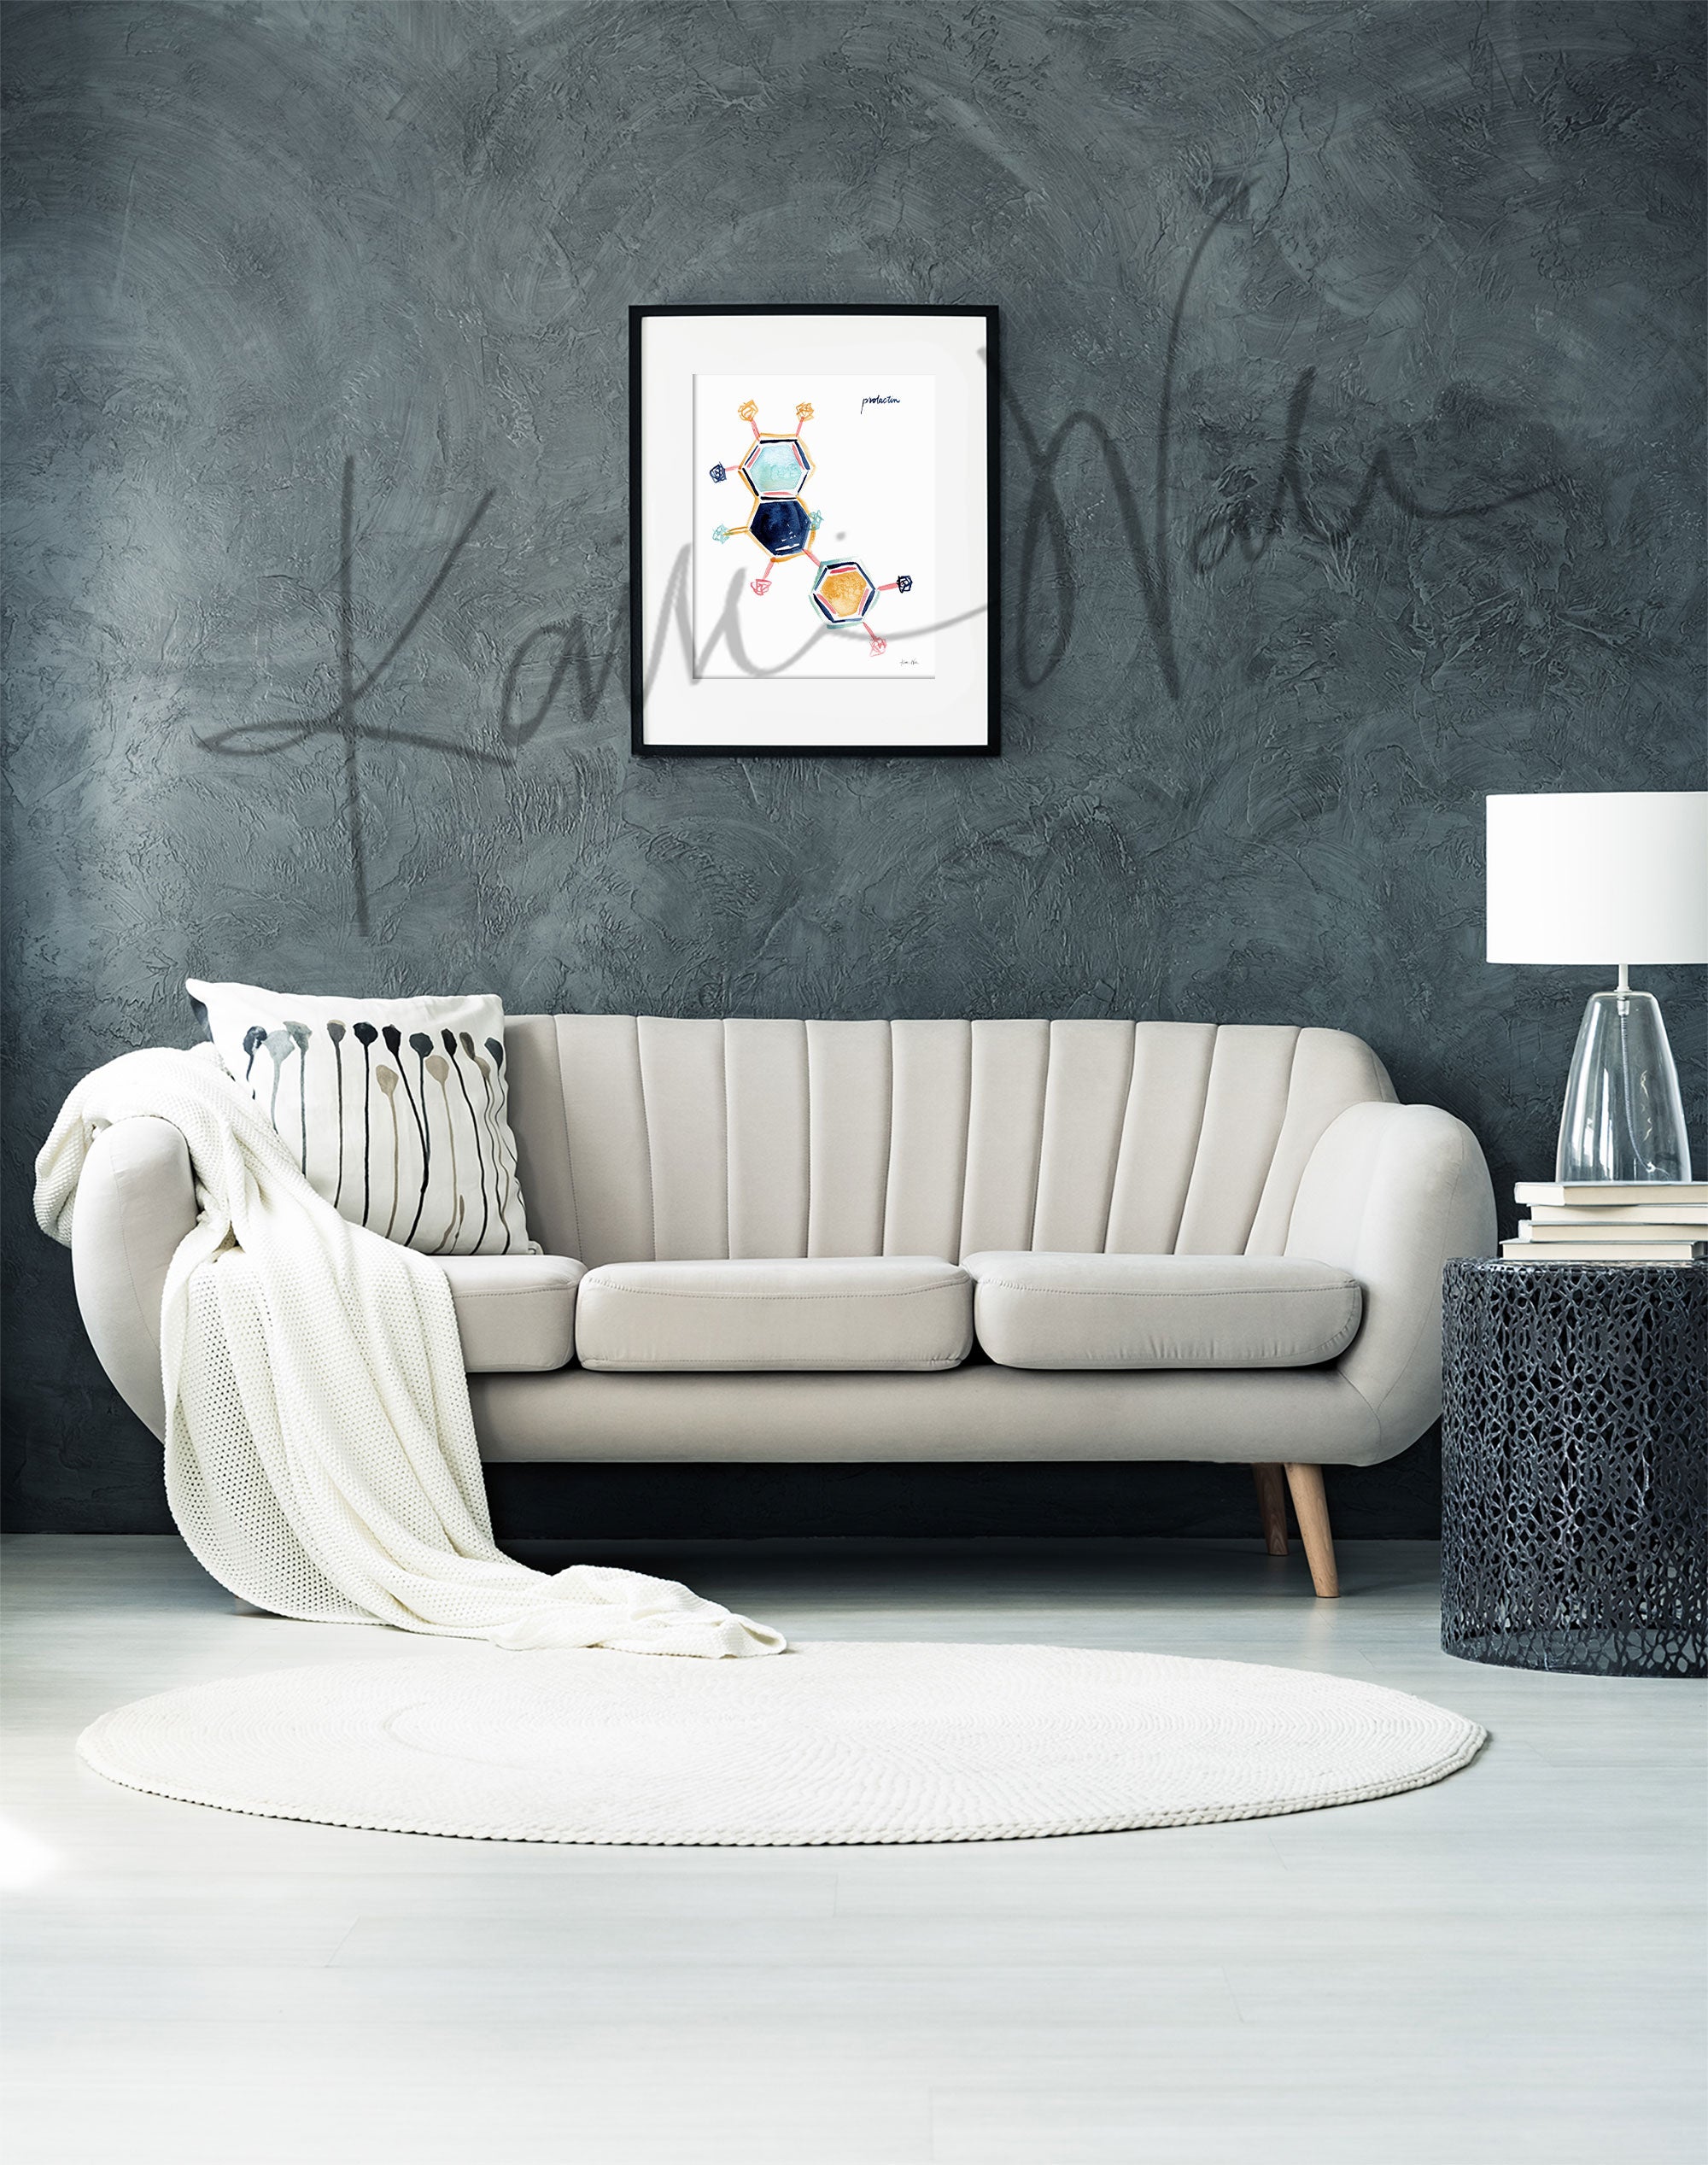 Framed watercolor painting of prolactin hormone molecular structure The painting is hanging over a white couch.